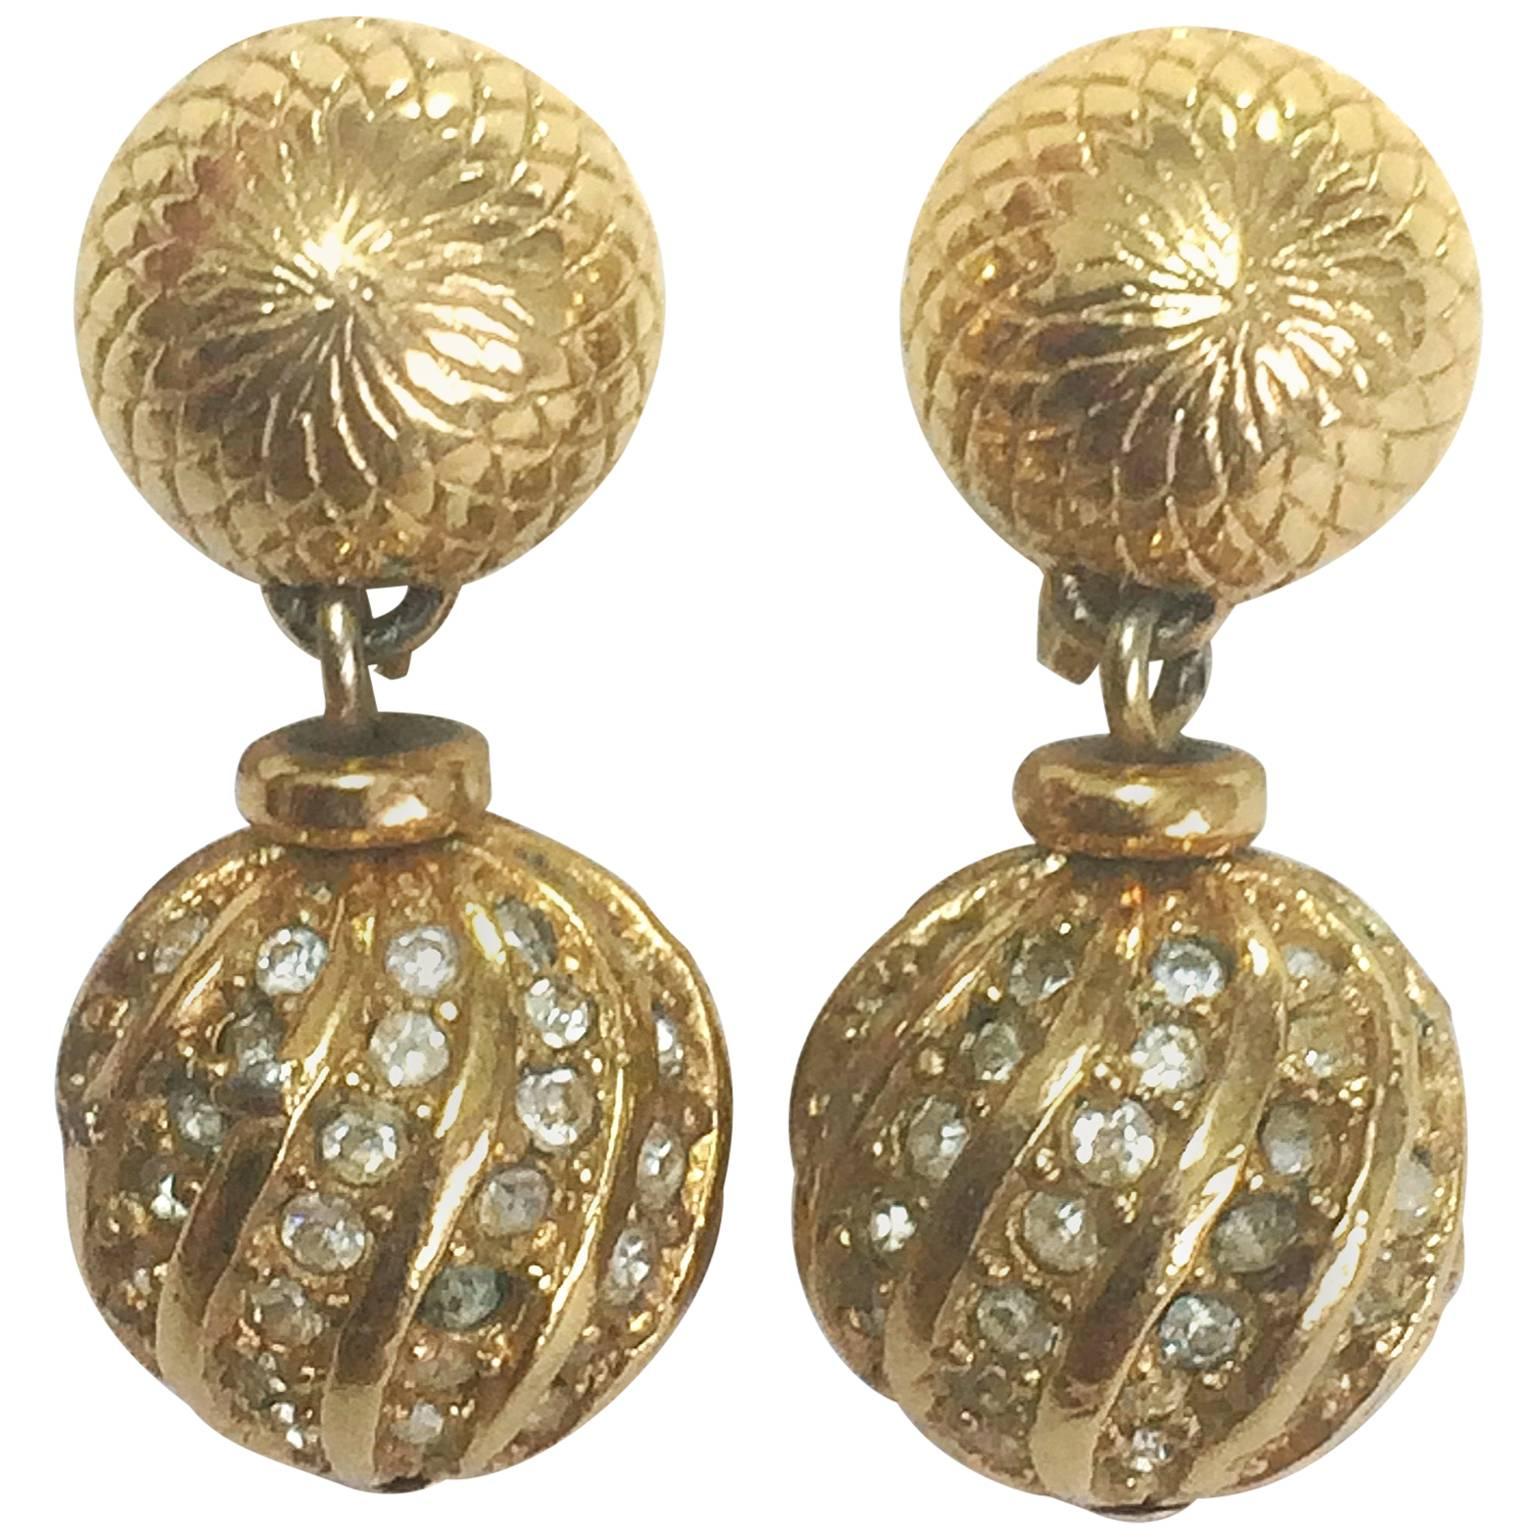 Vintage Christian Dior golden ball charm dangling earrings, rhinestone crystals For Sale